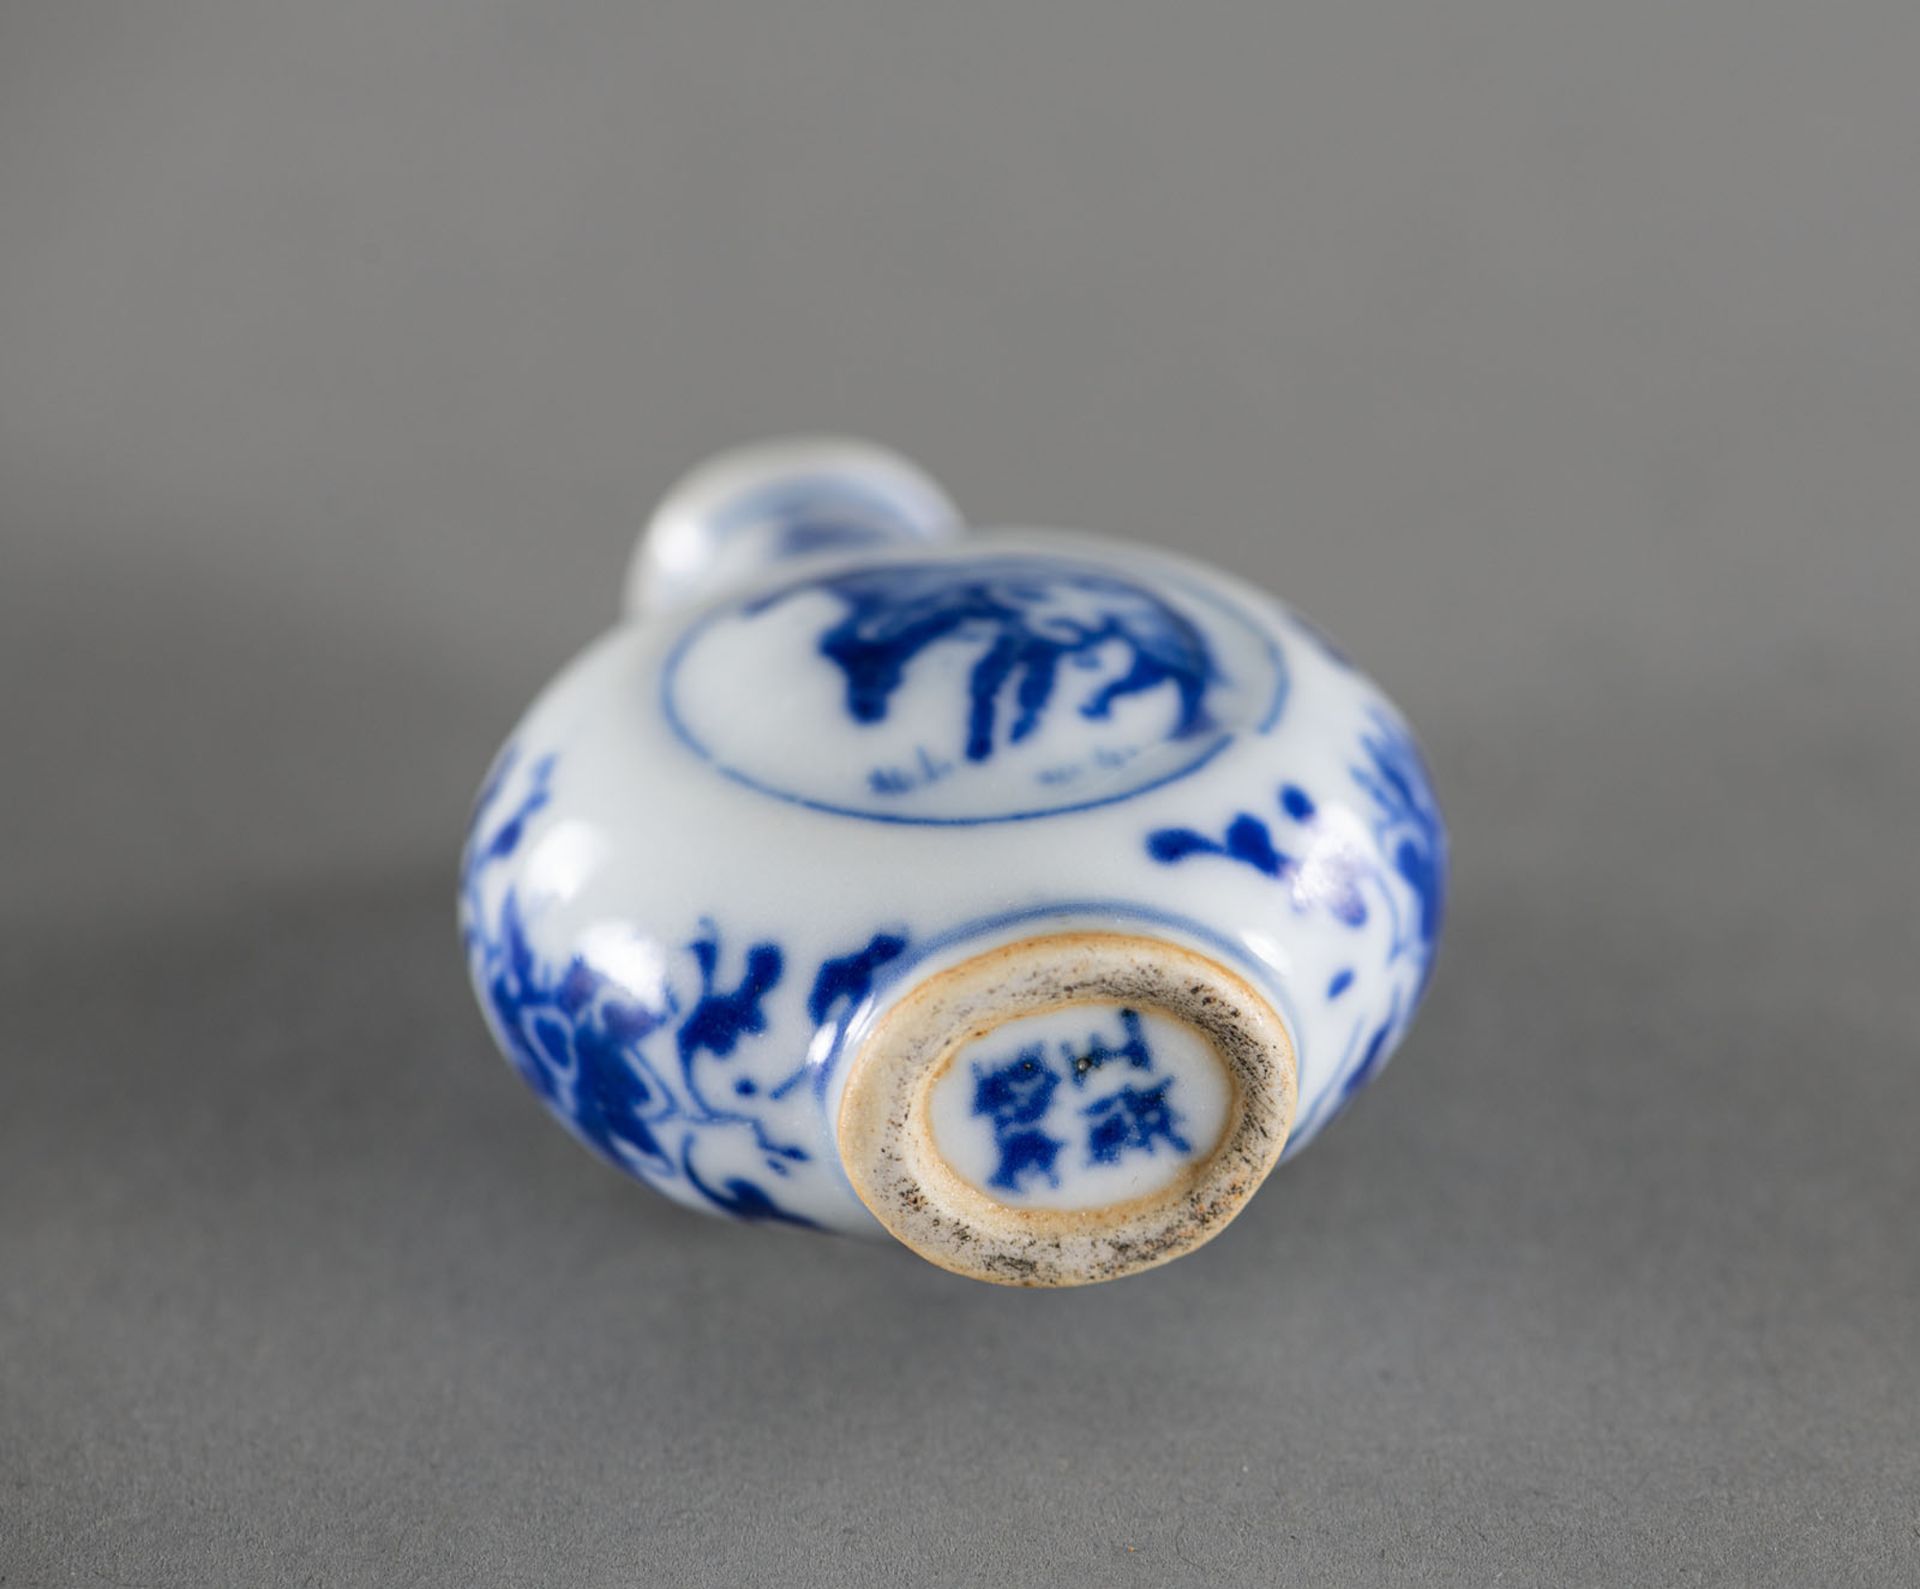 TWO GLASS AND ONE BLUE AND WHITE PORCELAIN SNUFFBOTTLE - Image 5 of 5